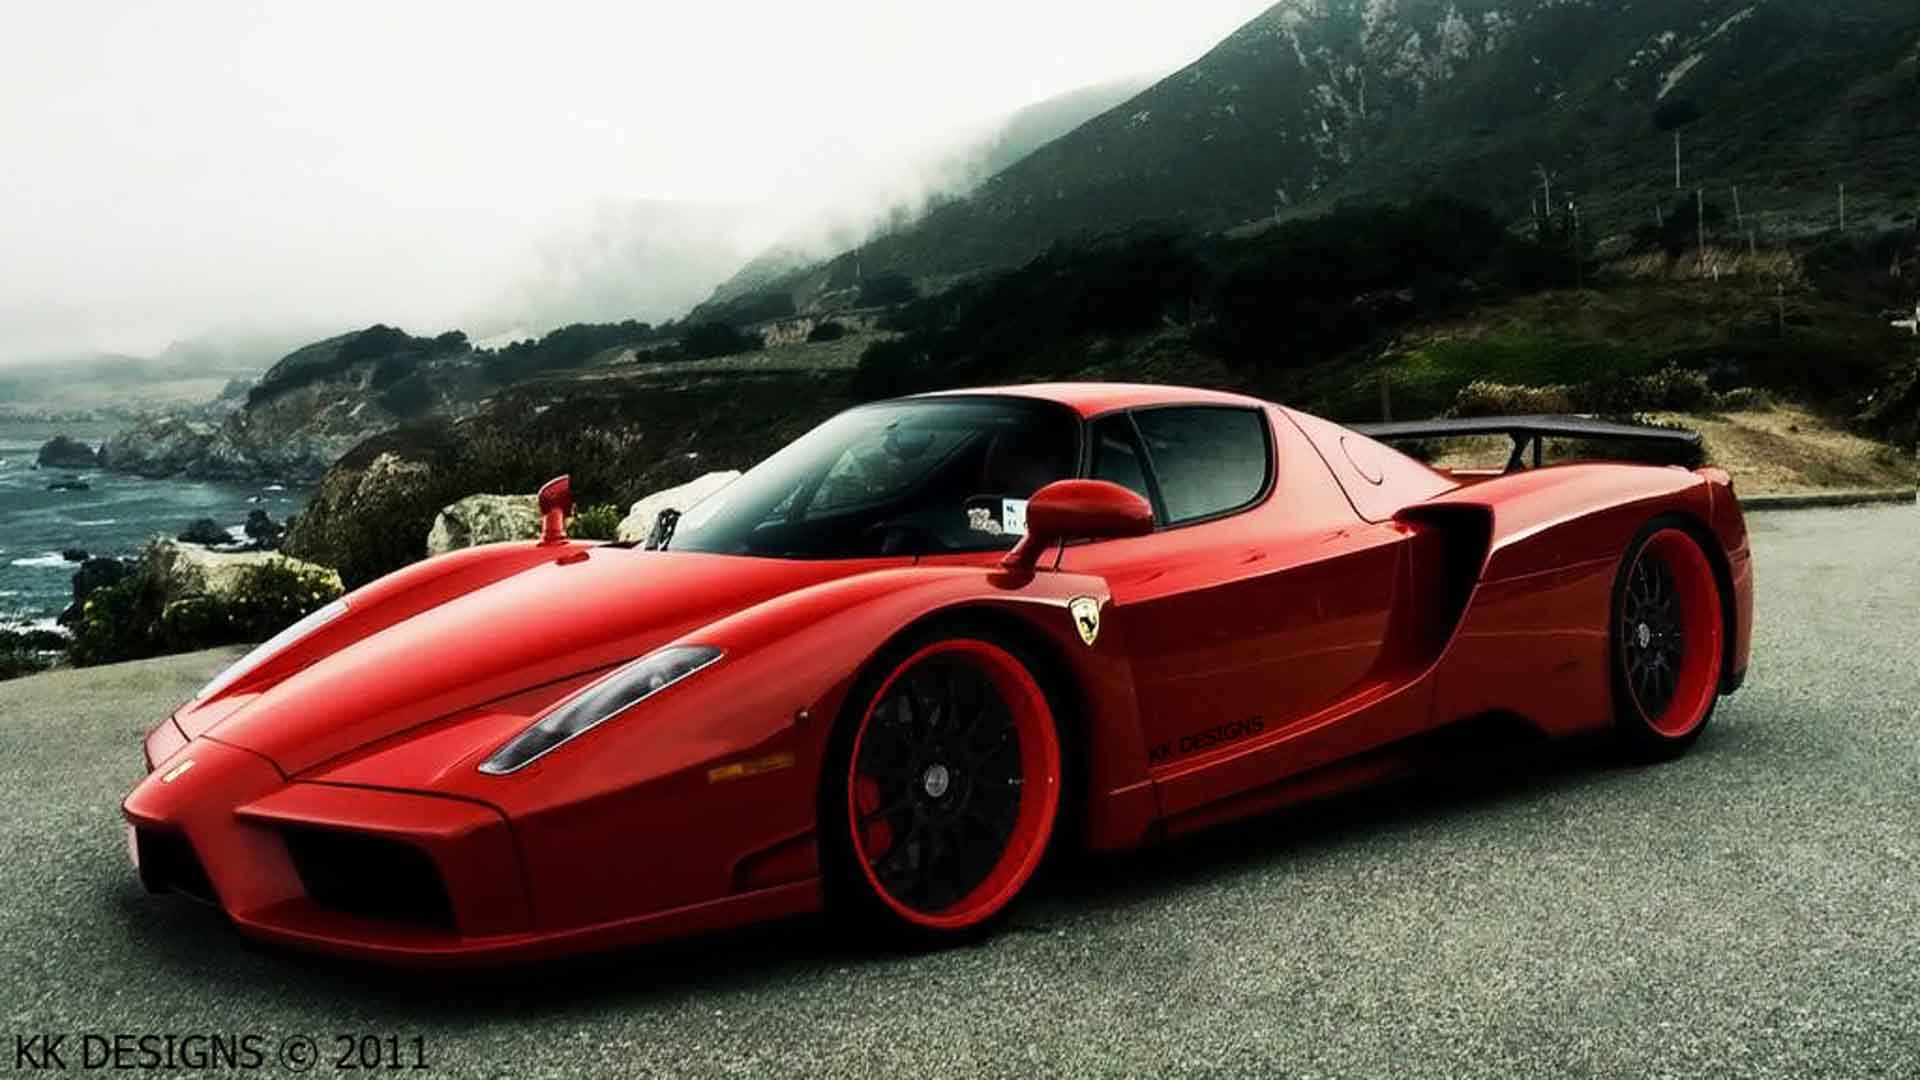 Exotic Cars Wallpapers - Wallpaper Cave
